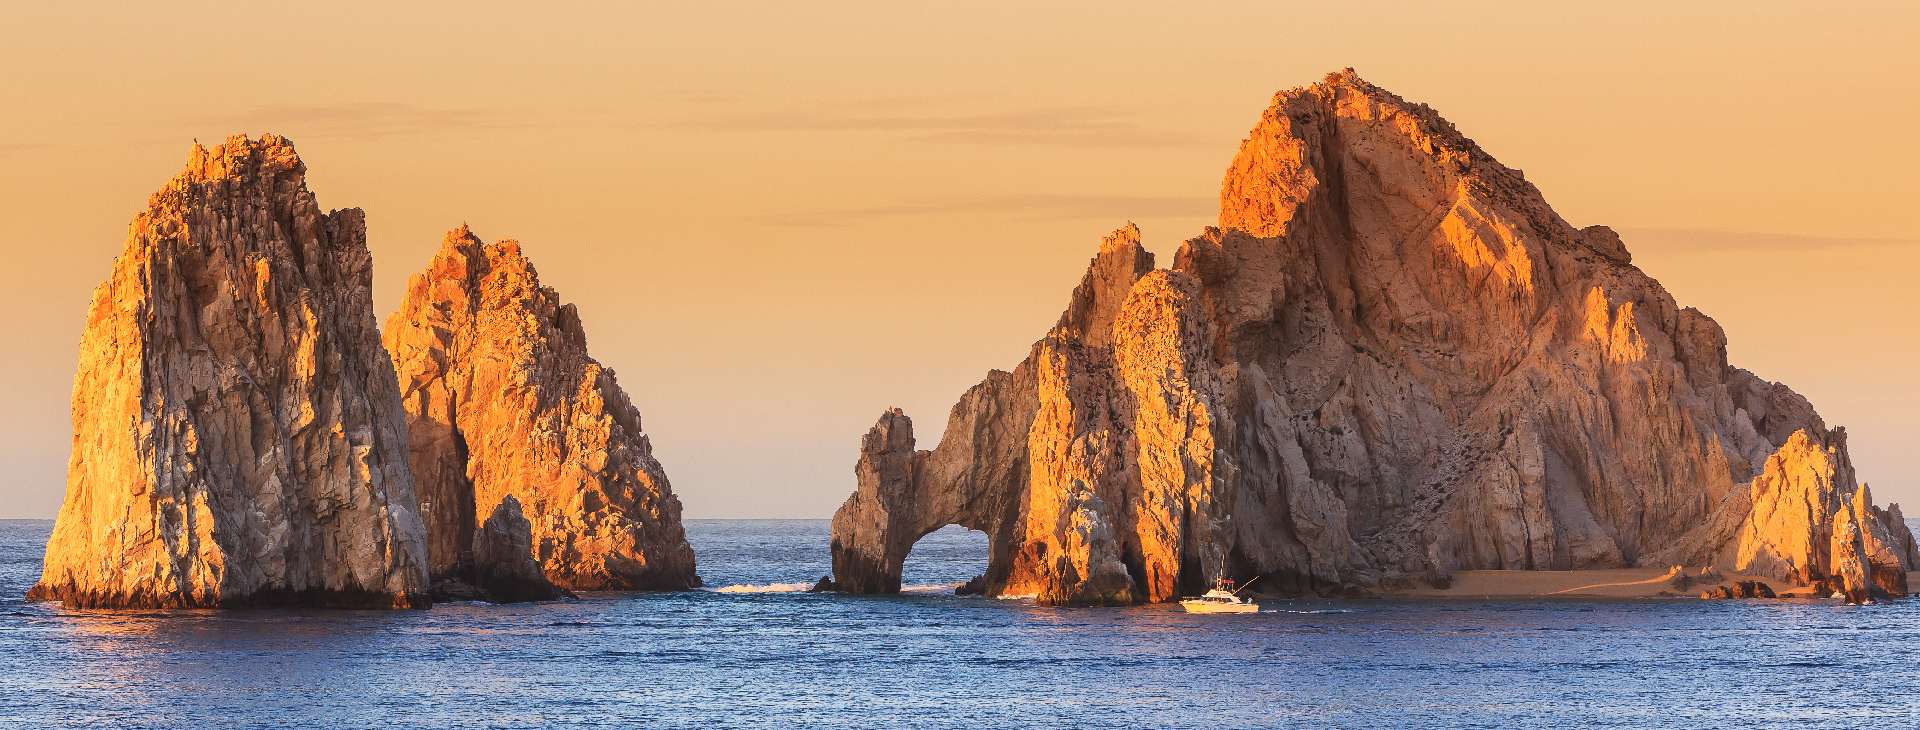 The,Arch,Of,Cabo,San,Lucas,At,Sunrise.,Mexico